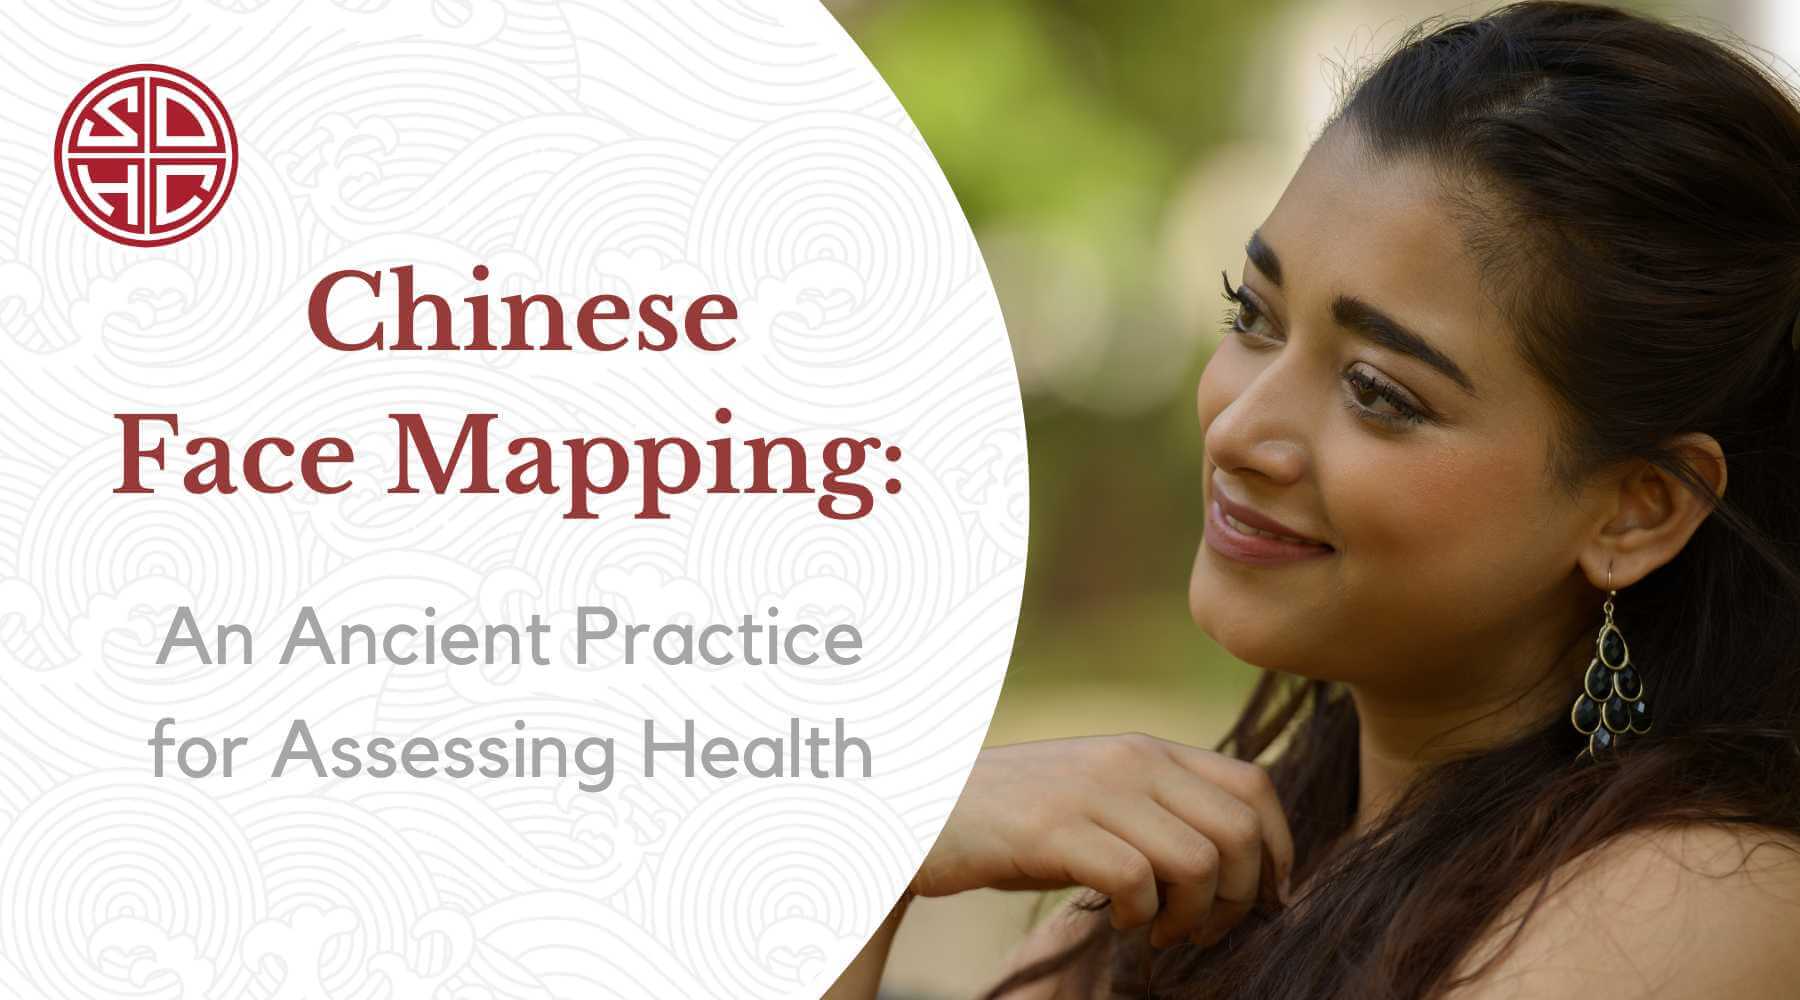 Chinese Face Mapping: An Ancient Practice for Assessing Health